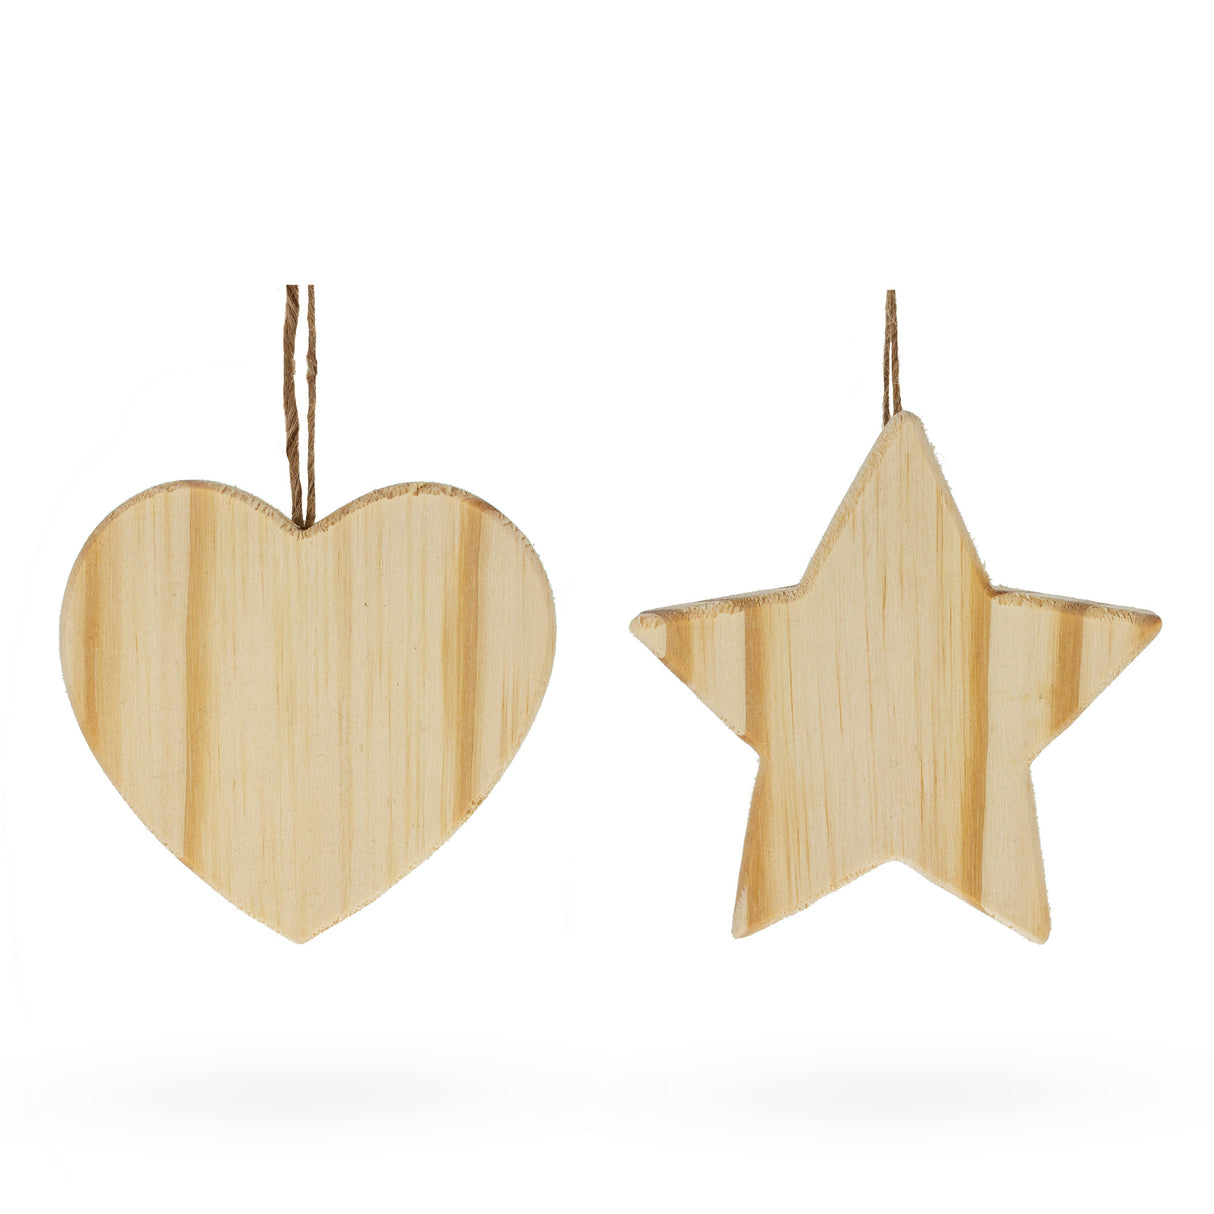 Set of 2 Unfinished Unpainted Wooden Heart and Star Christmas Ornaments Cutouts DIY Craft 4.25 Inches in Beige color, Star shape